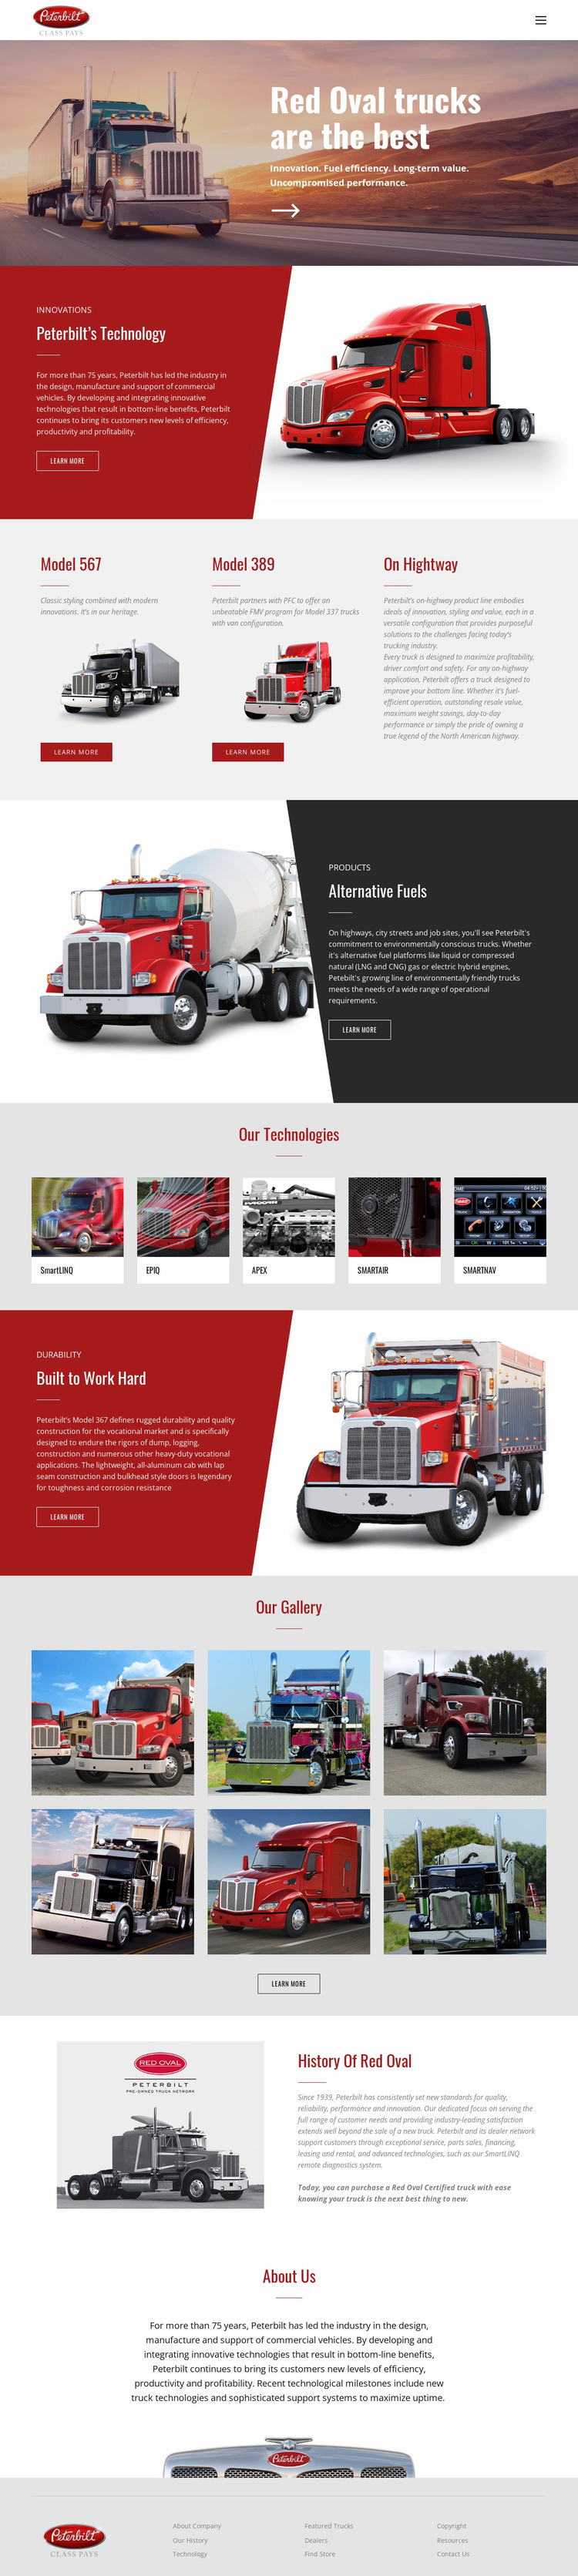 Red oval truck transportaion Website Design